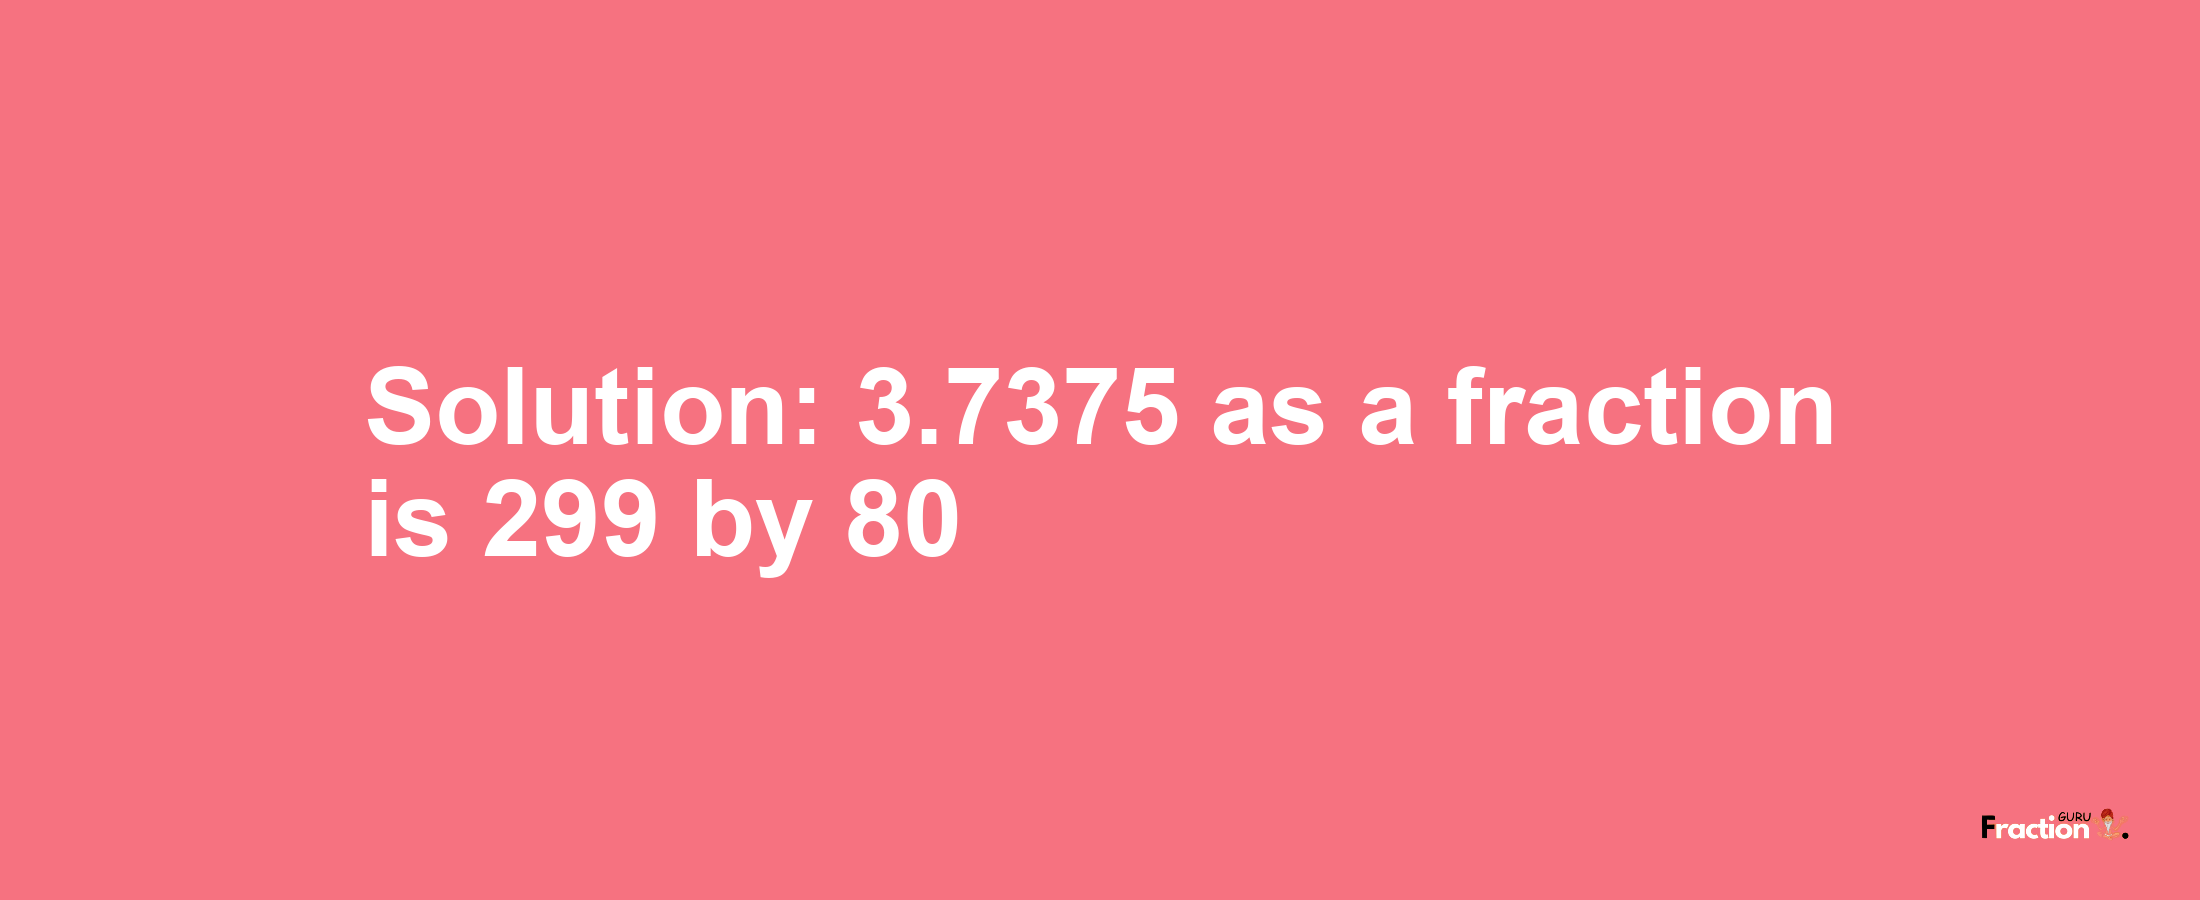 Solution:3.7375 as a fraction is 299/80